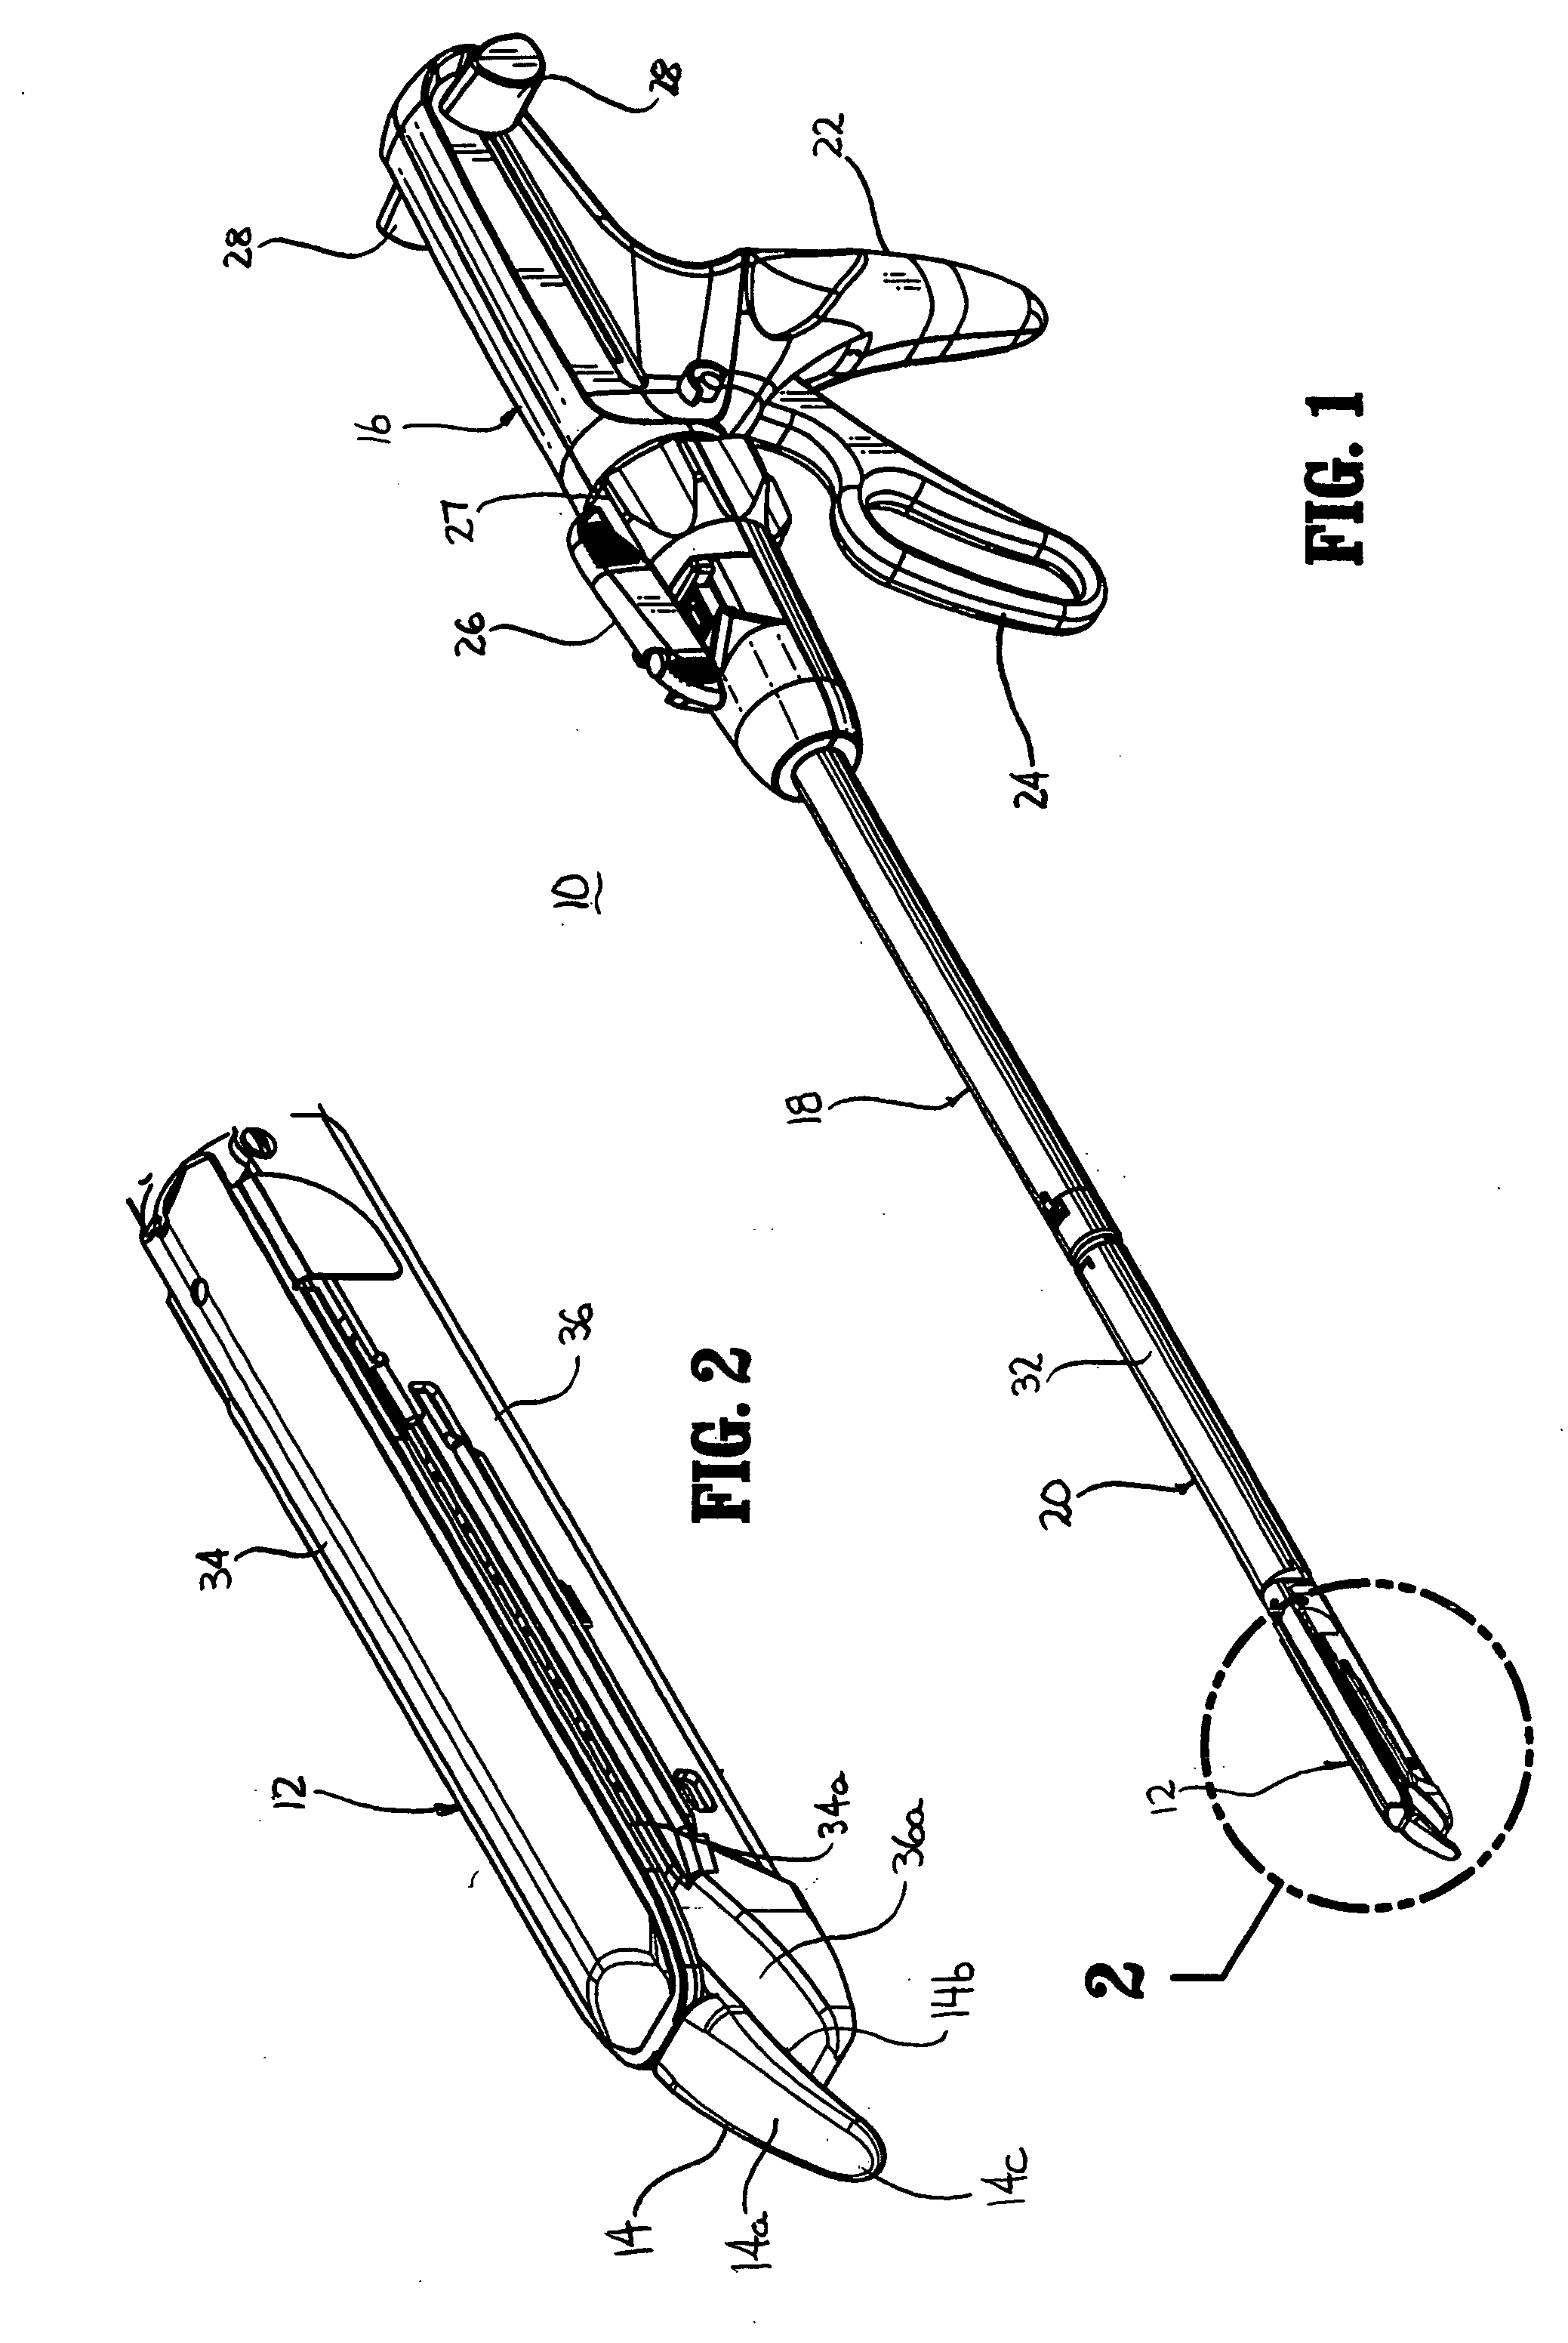 Surgical stapling device with dissecting tip